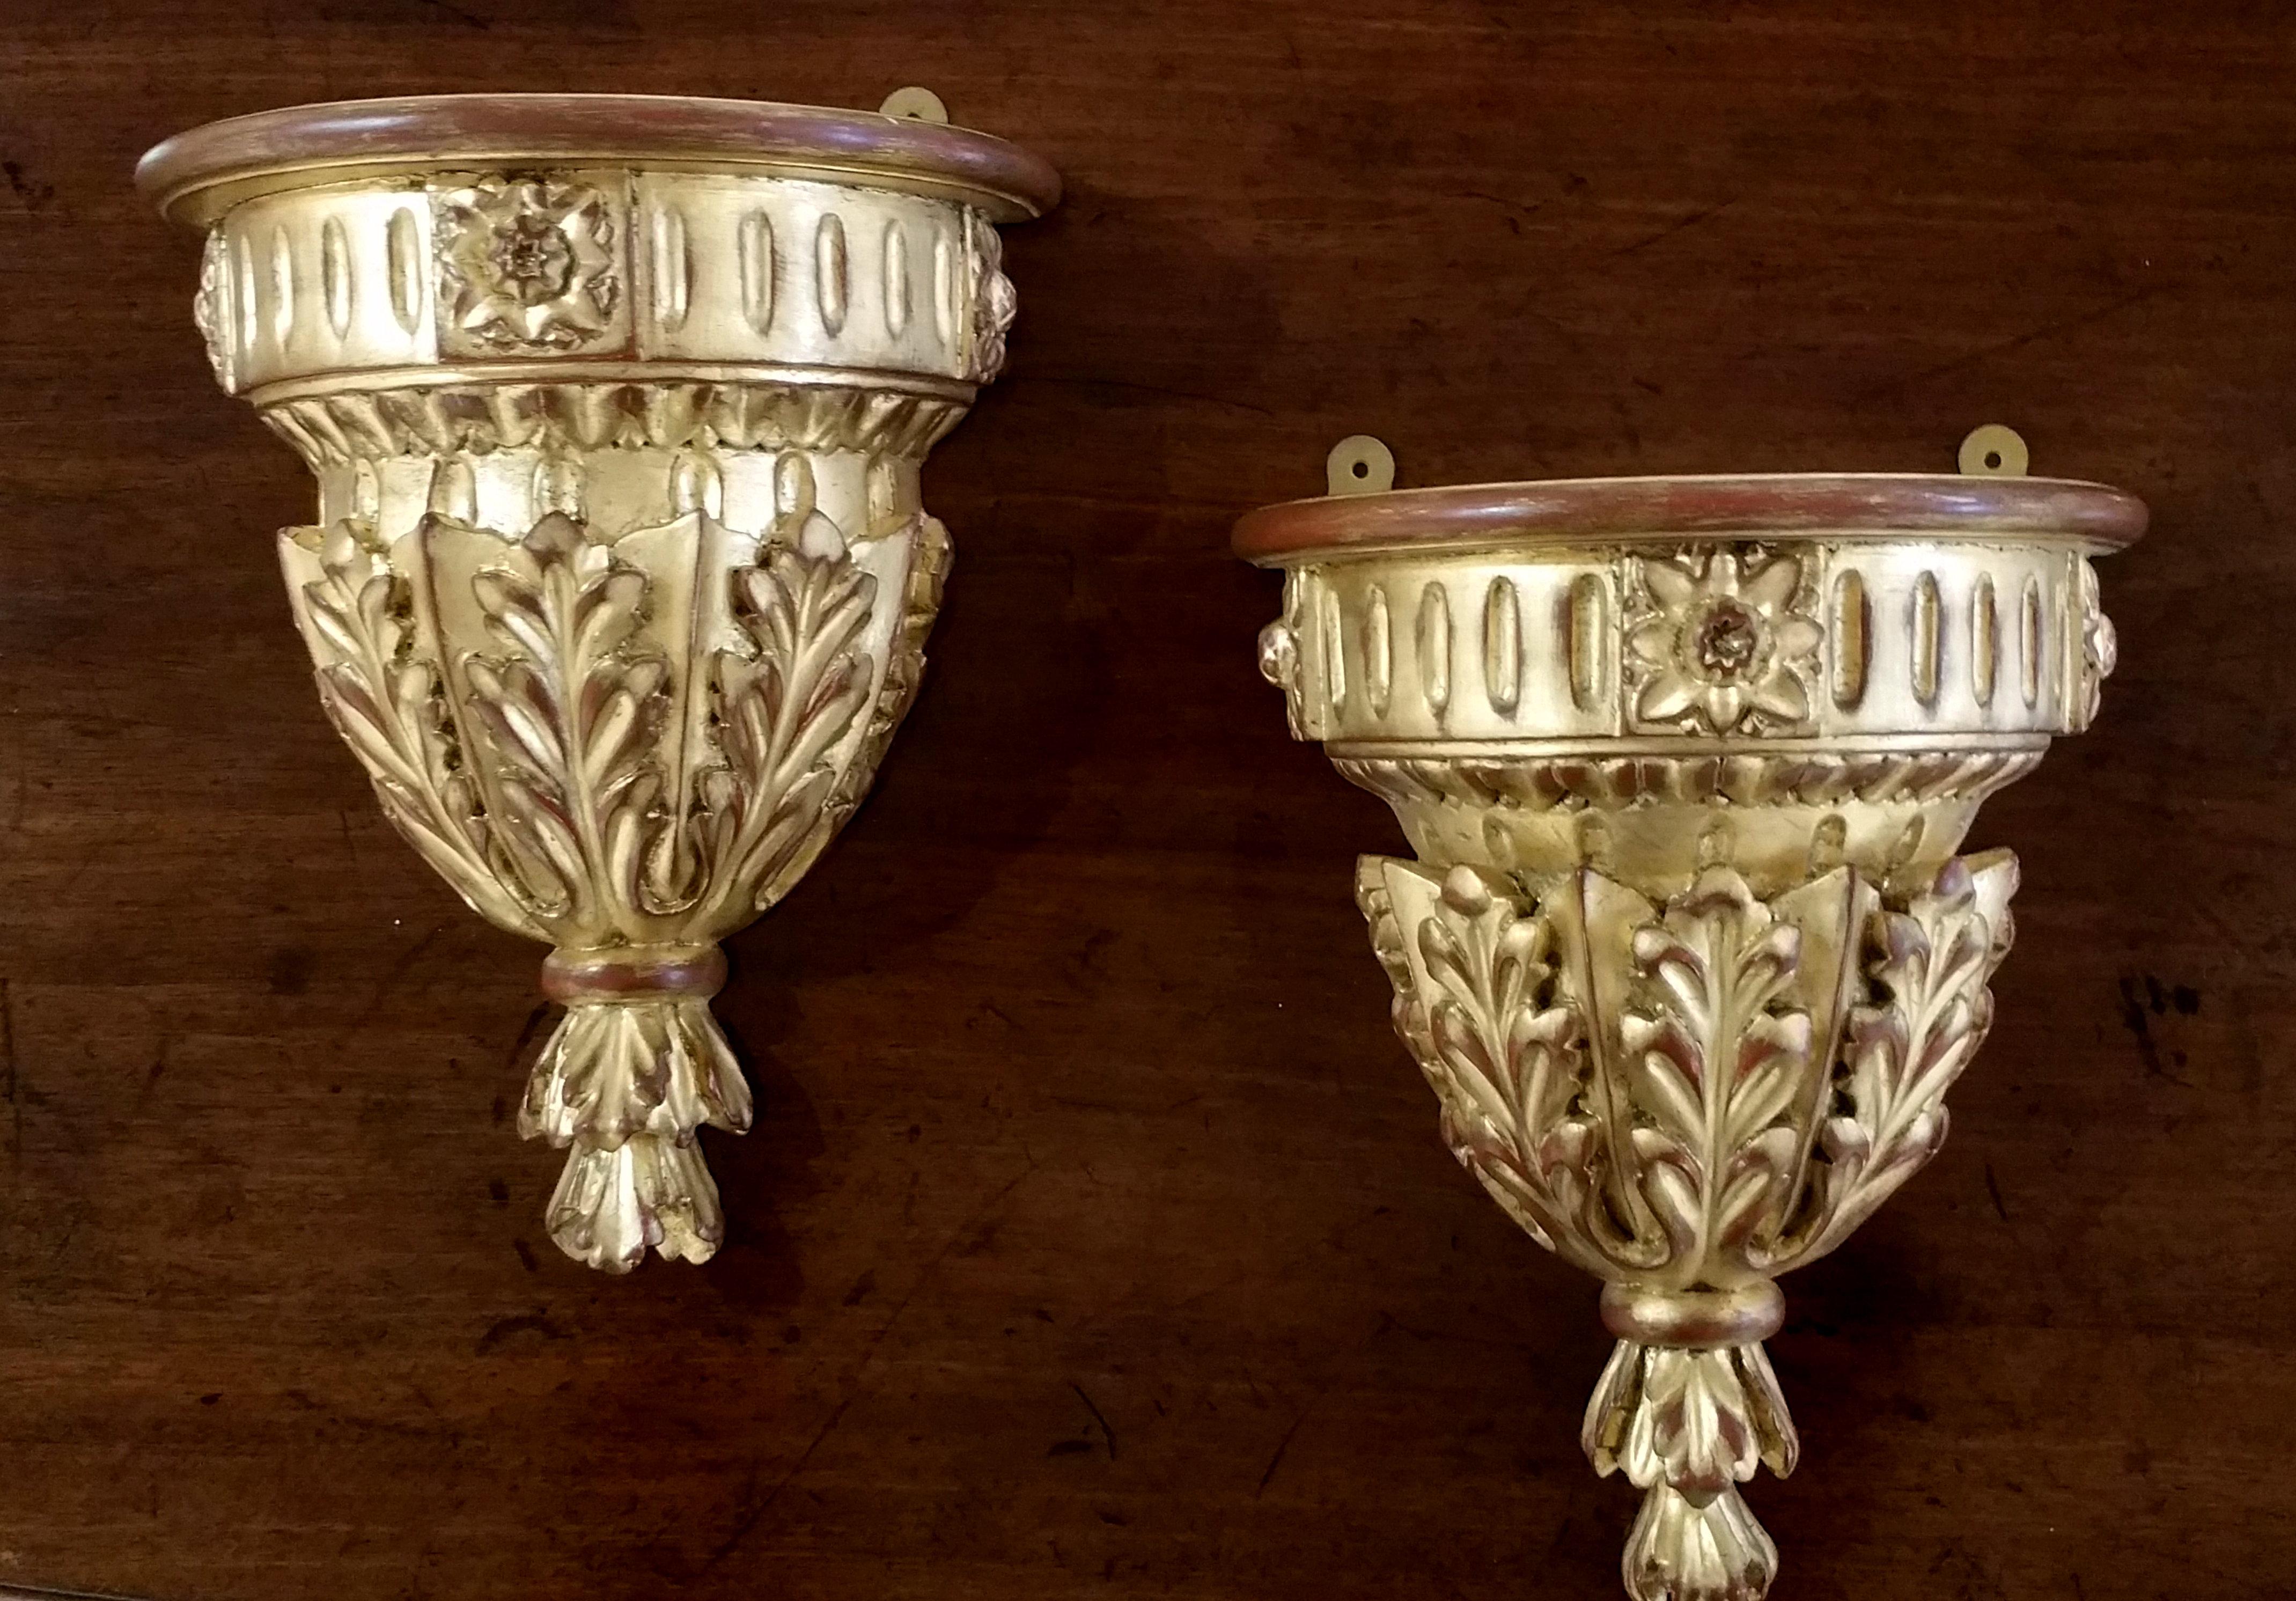 This very attractive set of carved giltwood wall brackets are designed in the shape of ornate urns styled with foliage and ribbing detail. Each bracket measures 8 ¾ in, 22.2 cm wide, 4 ½ in, 11.5 cm deep and 10 ½ in, 26.7 cm in height. These